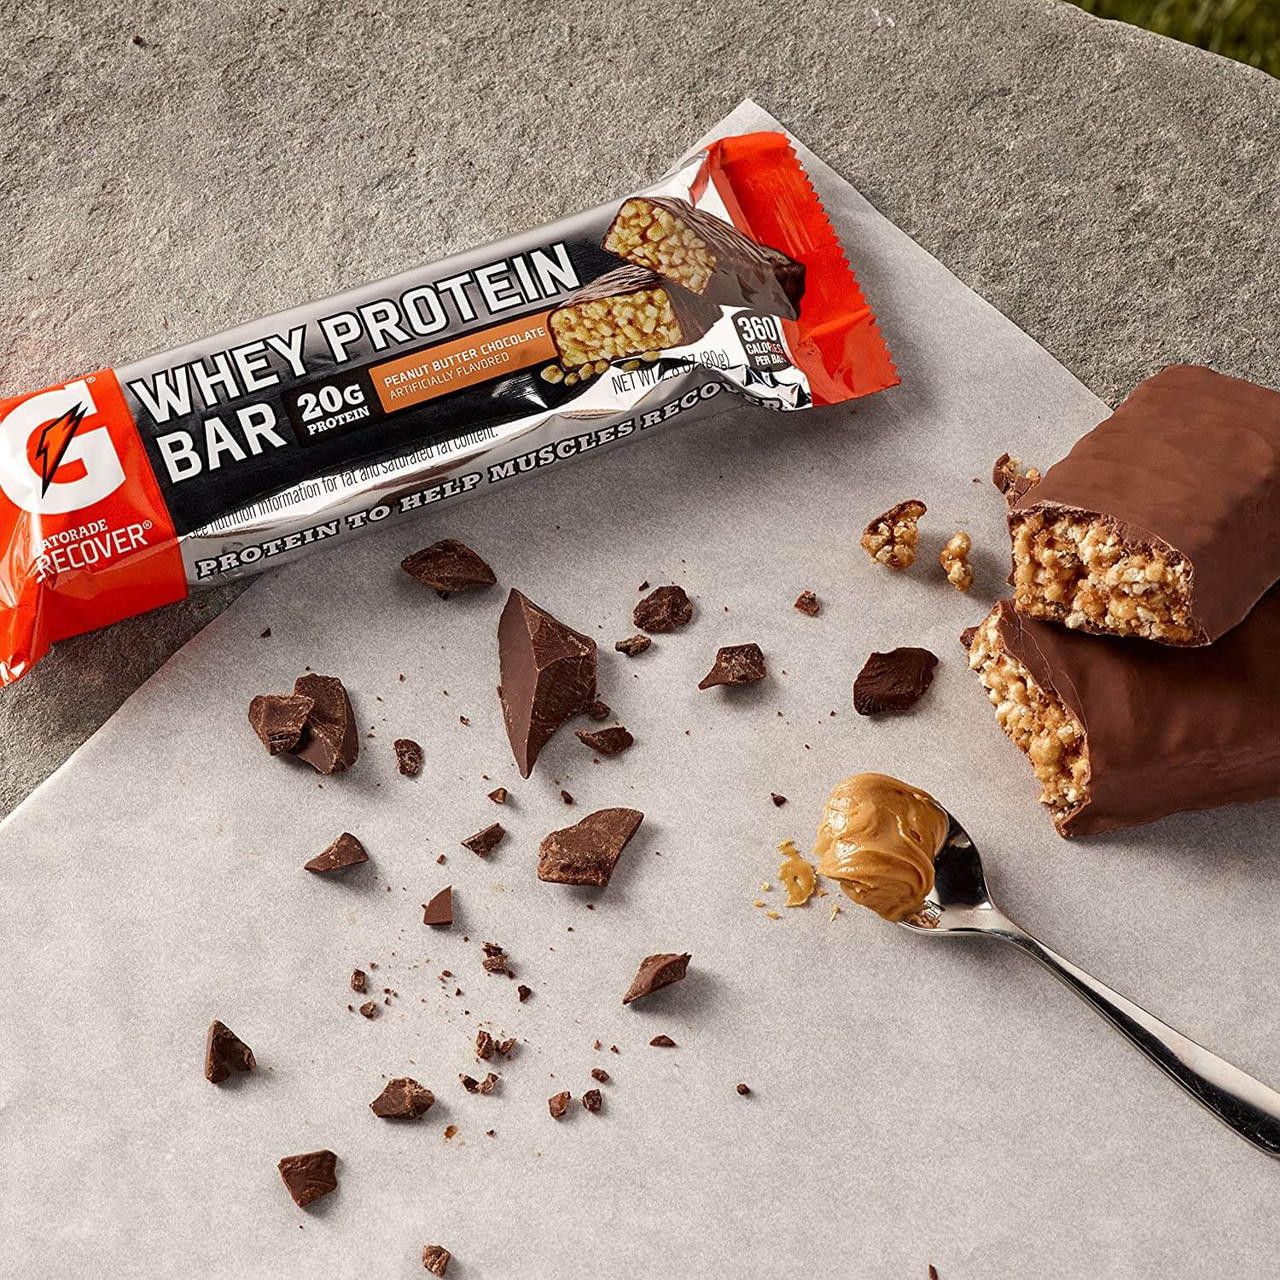 GATORADE Gatorade Whey Protein Bar | Peanut Butter Chocolate Flavor | 12 x 80g | 20g Protein for Athletic Recovery 